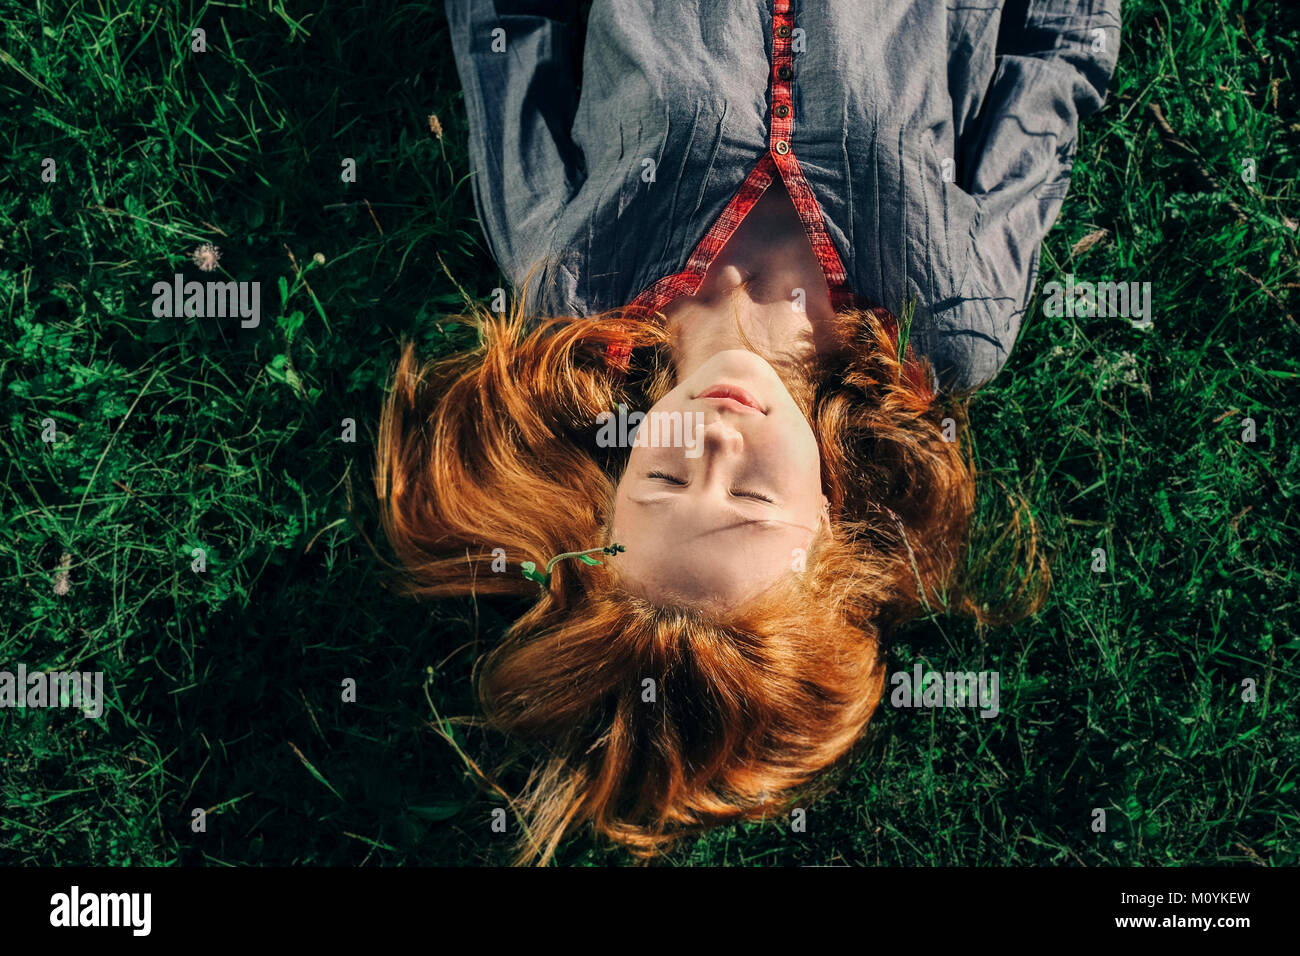 Caucasian woman laying in grass Banque D'Images